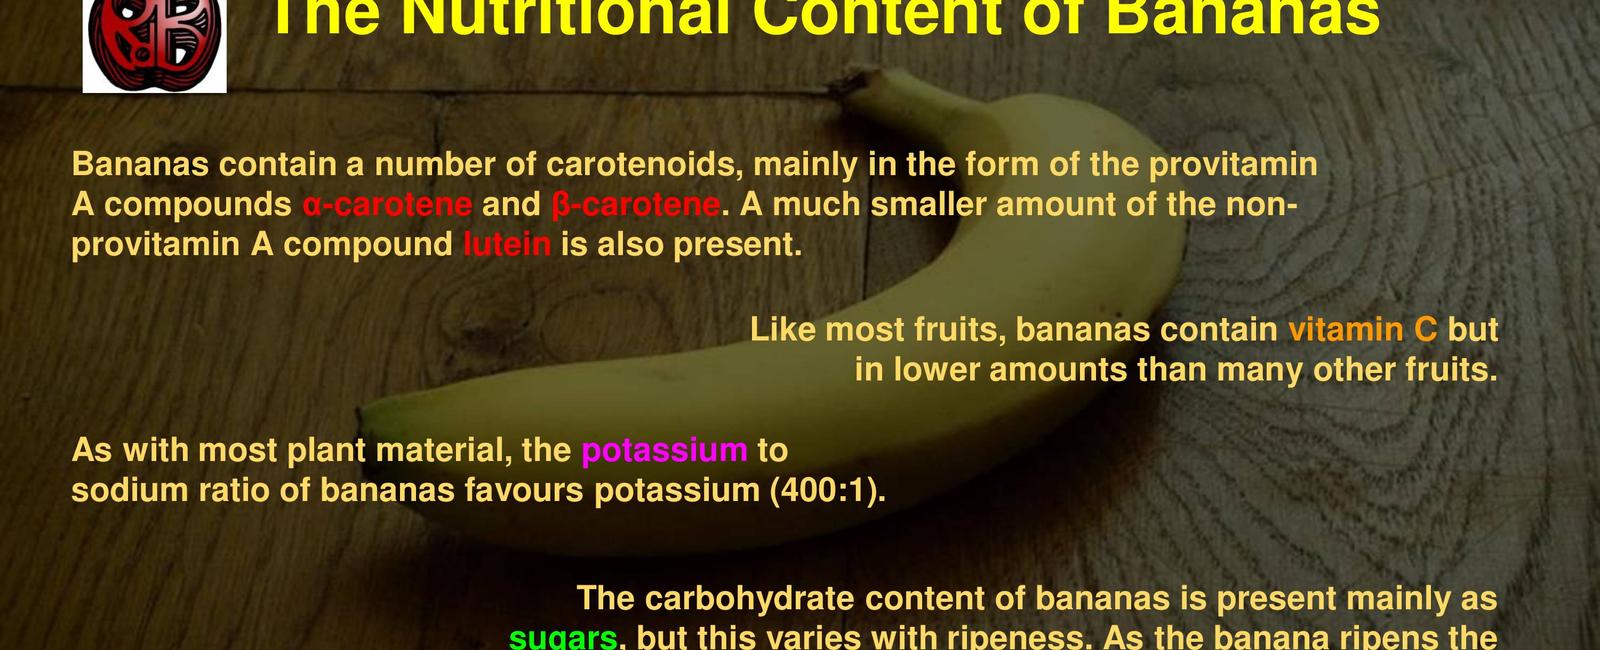 Bananas contain potassium and since potassium decays that makes them slightly radioactive